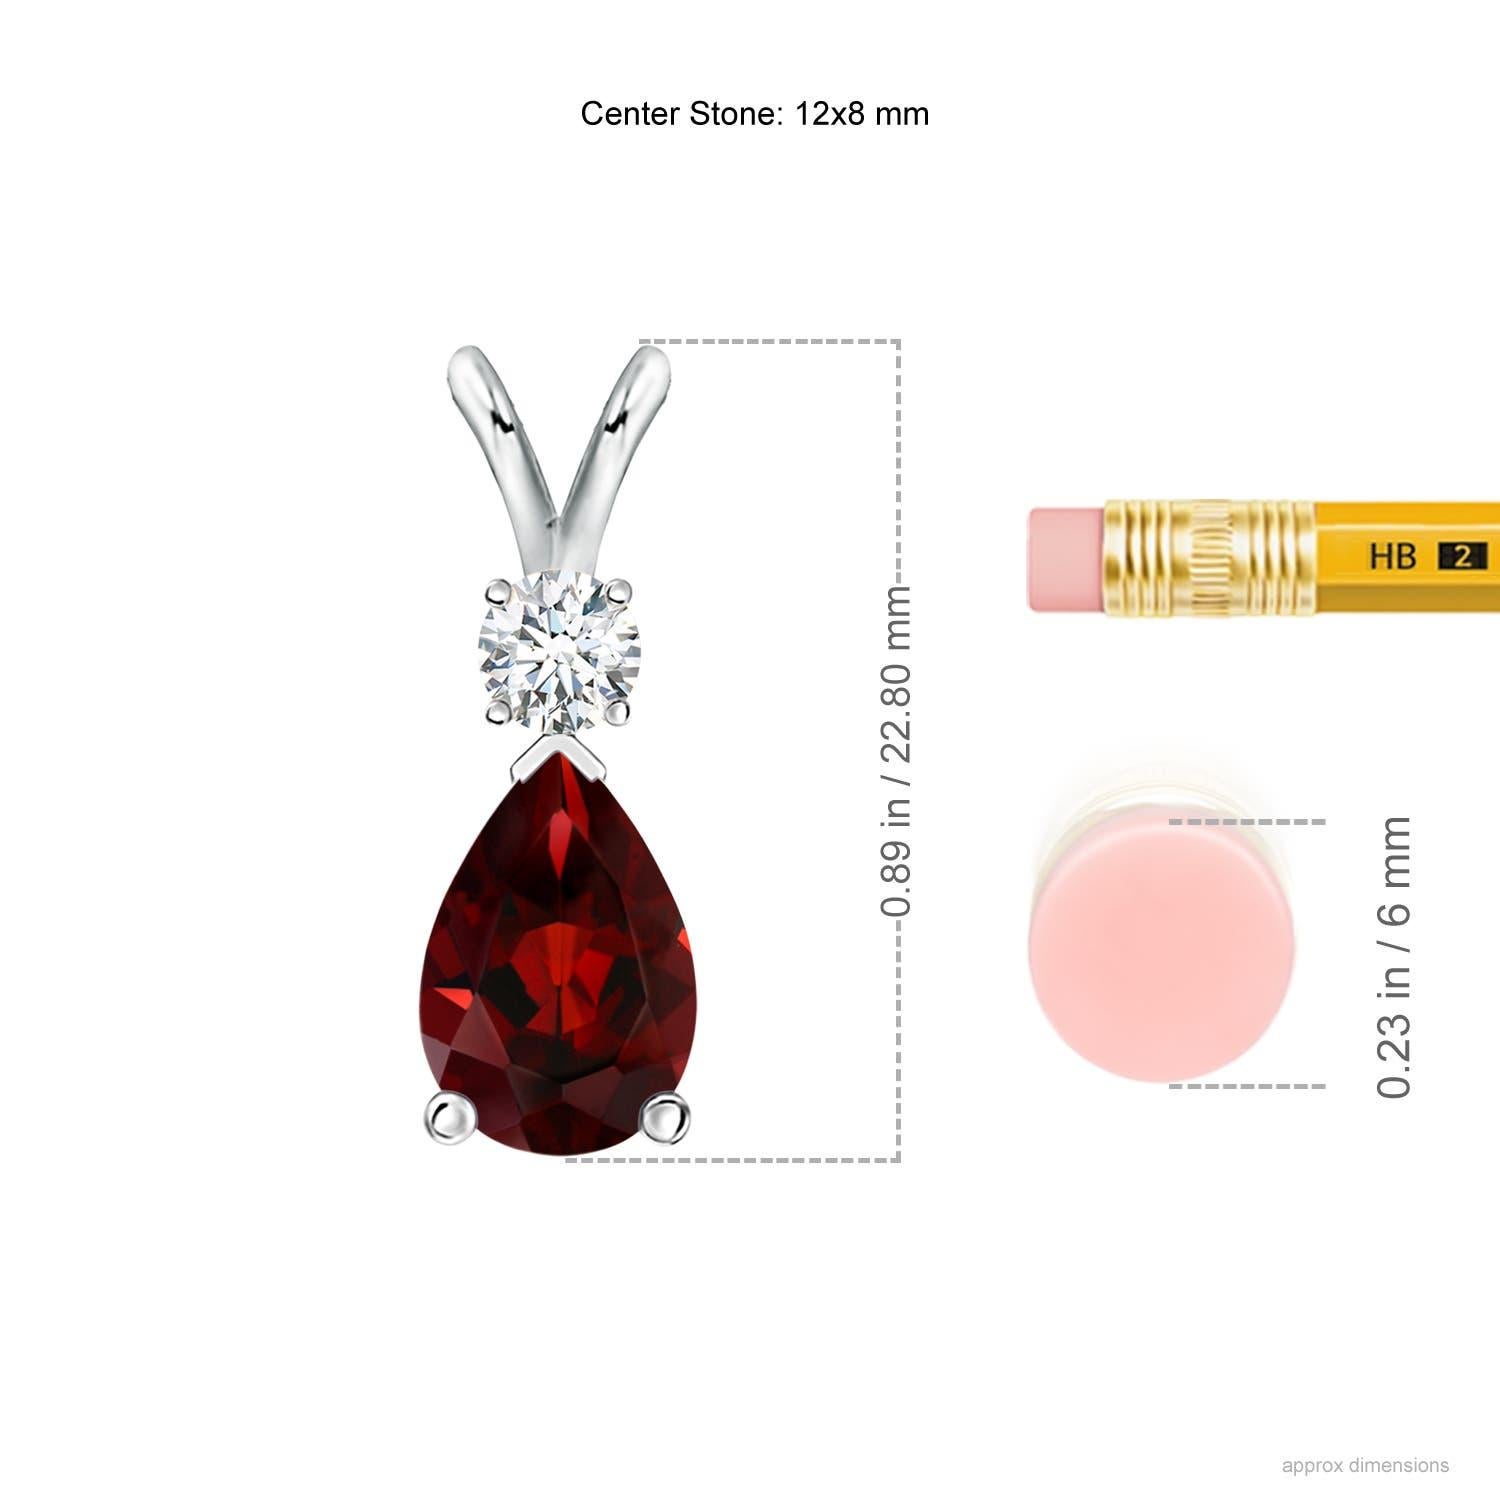 A pear-shaped intense red garnet is secured in a prong setting and embellished with a diamond accent on the top. Simple yet stunning, this teardrop garnet pendant with V bale is sculpted in platinum.